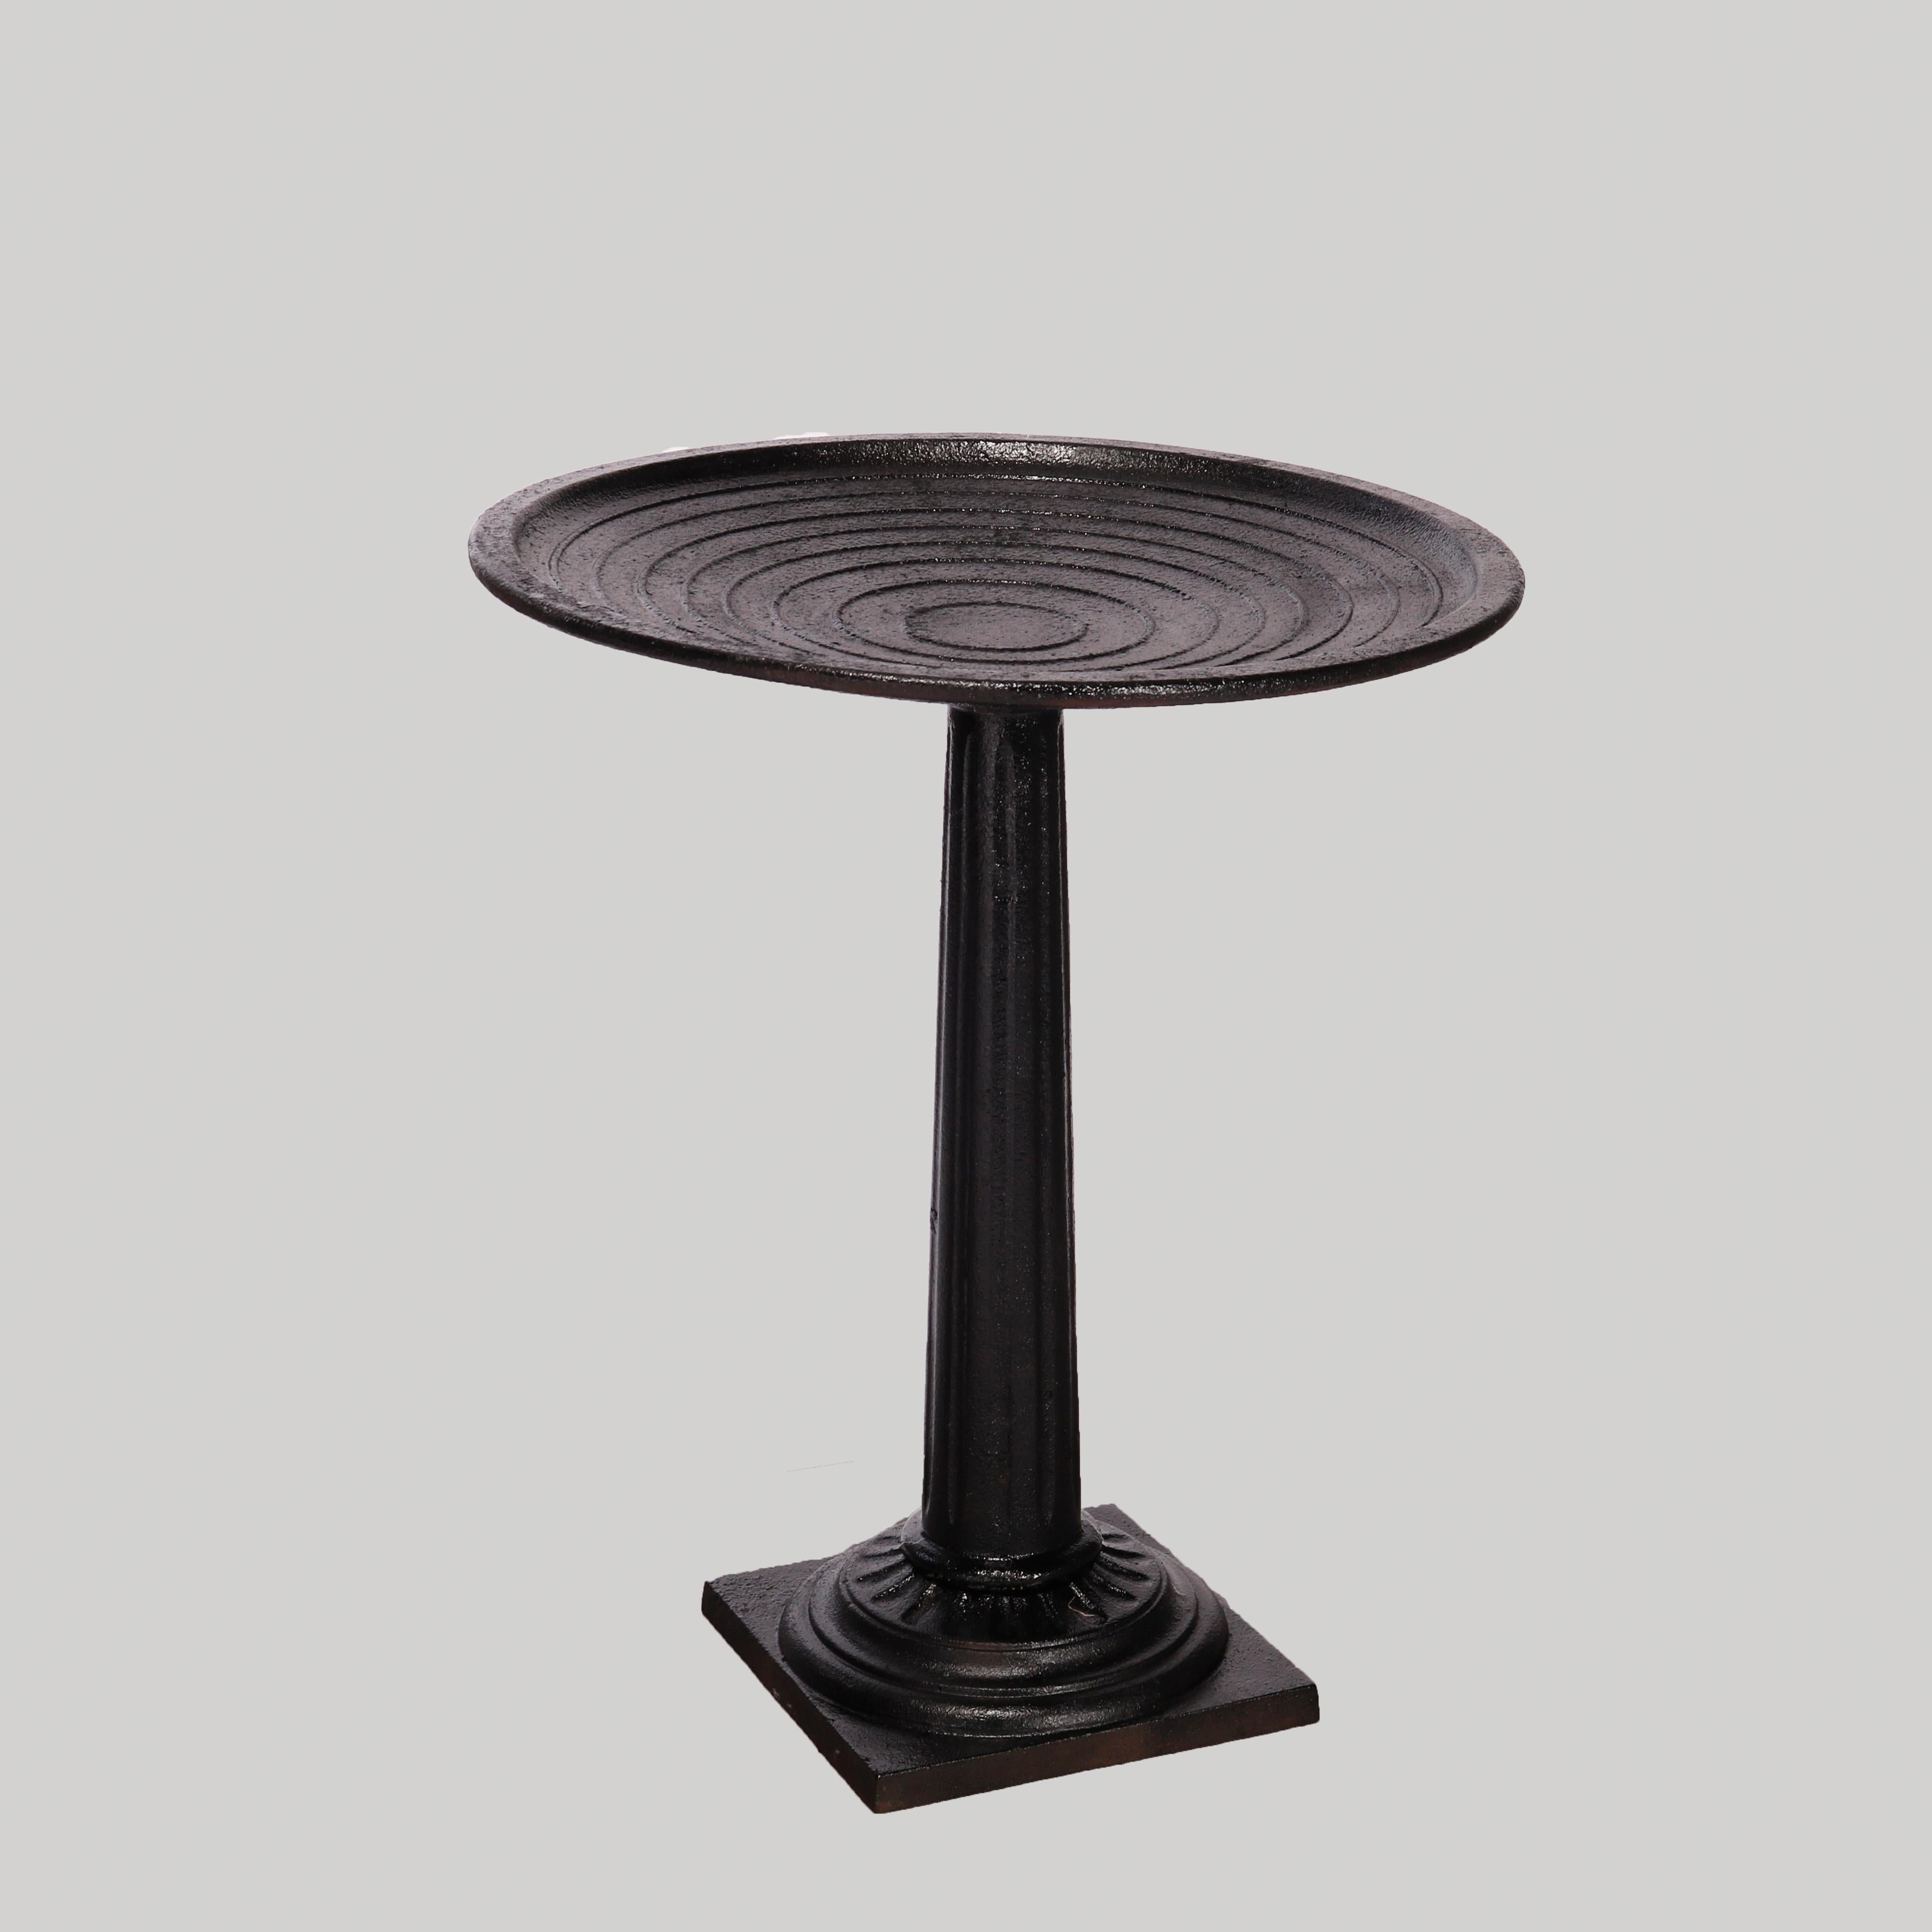 A Classical garden birdbath offers cast iron construction with bathing bowl seated on reeded and flared Greek column pedestal, 20th century

Measures- 27''H x 22.75''W x 22.75''D.

Catalogue Note: Ask about DISCOUNTED DELIVERY RATES available to